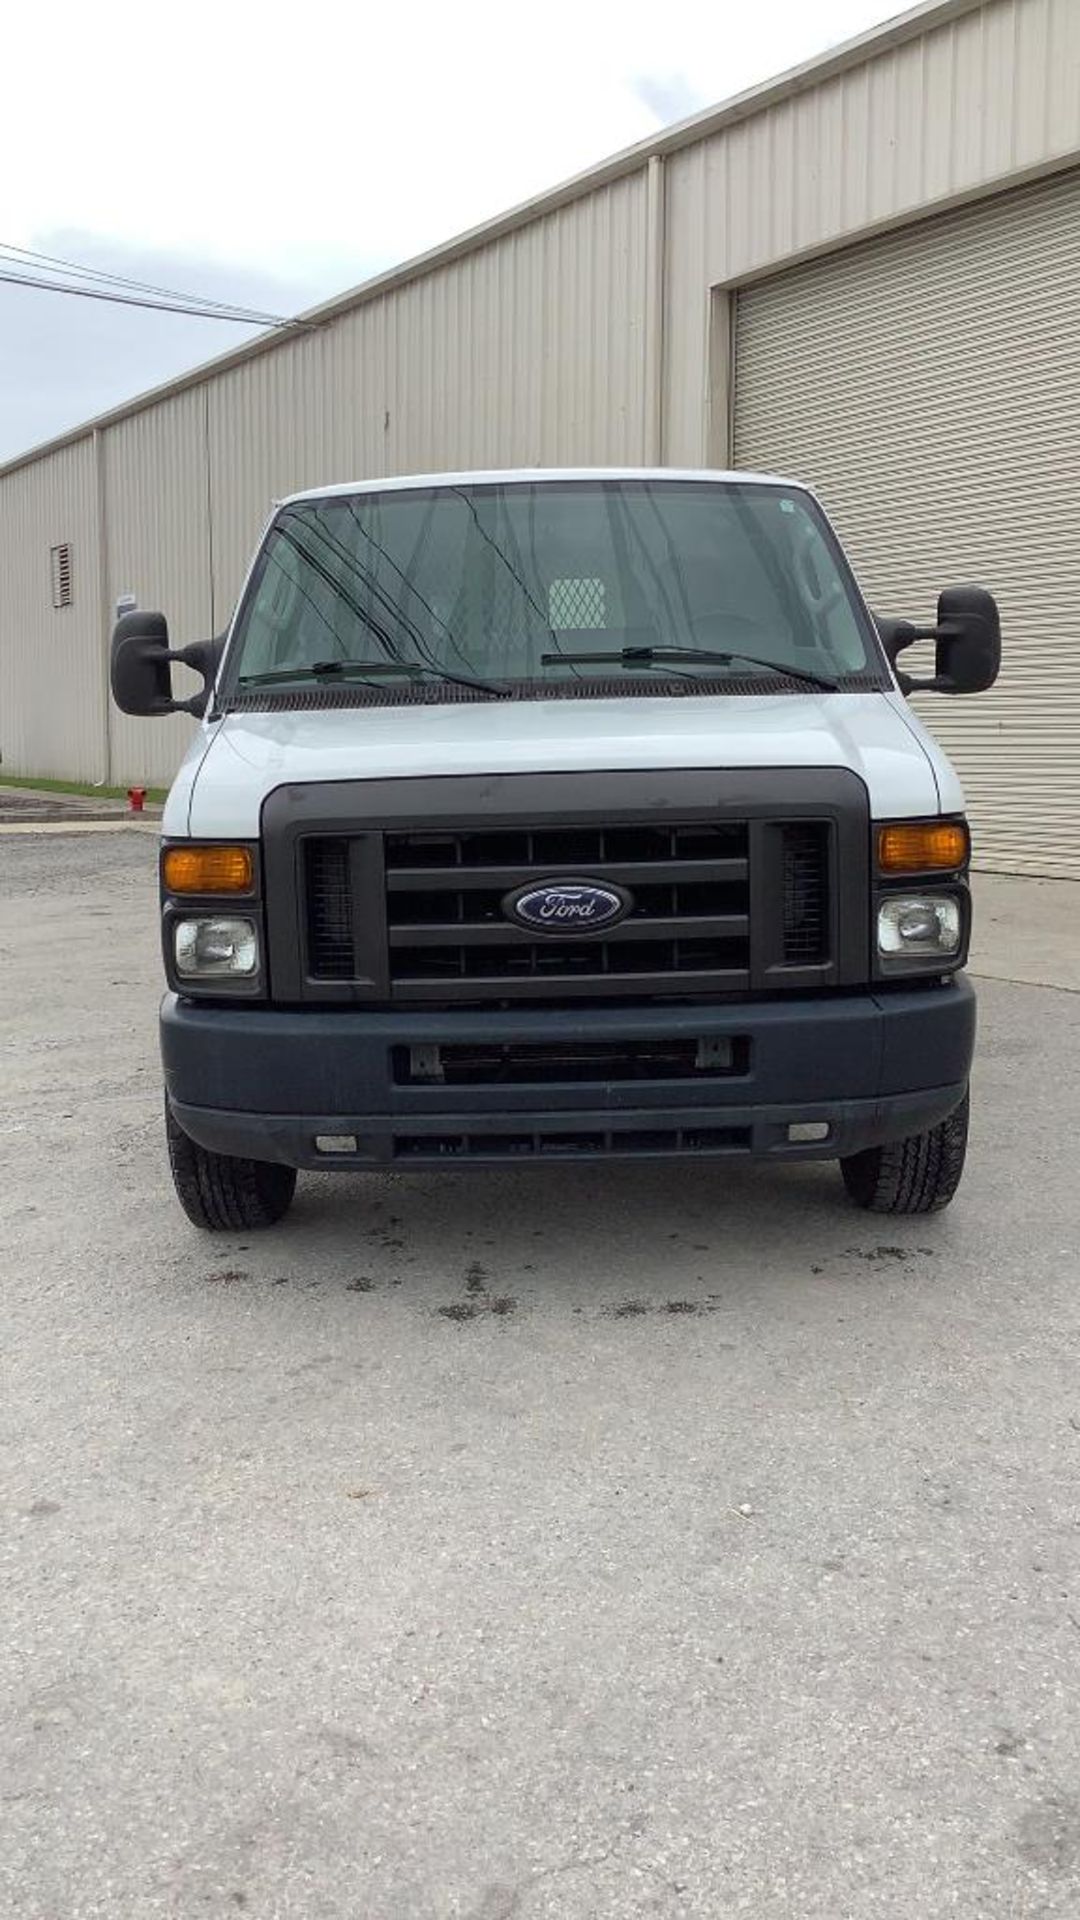 2009 Ford E-350 Cargo Van 2WD Super Duty - Image 7 of 74